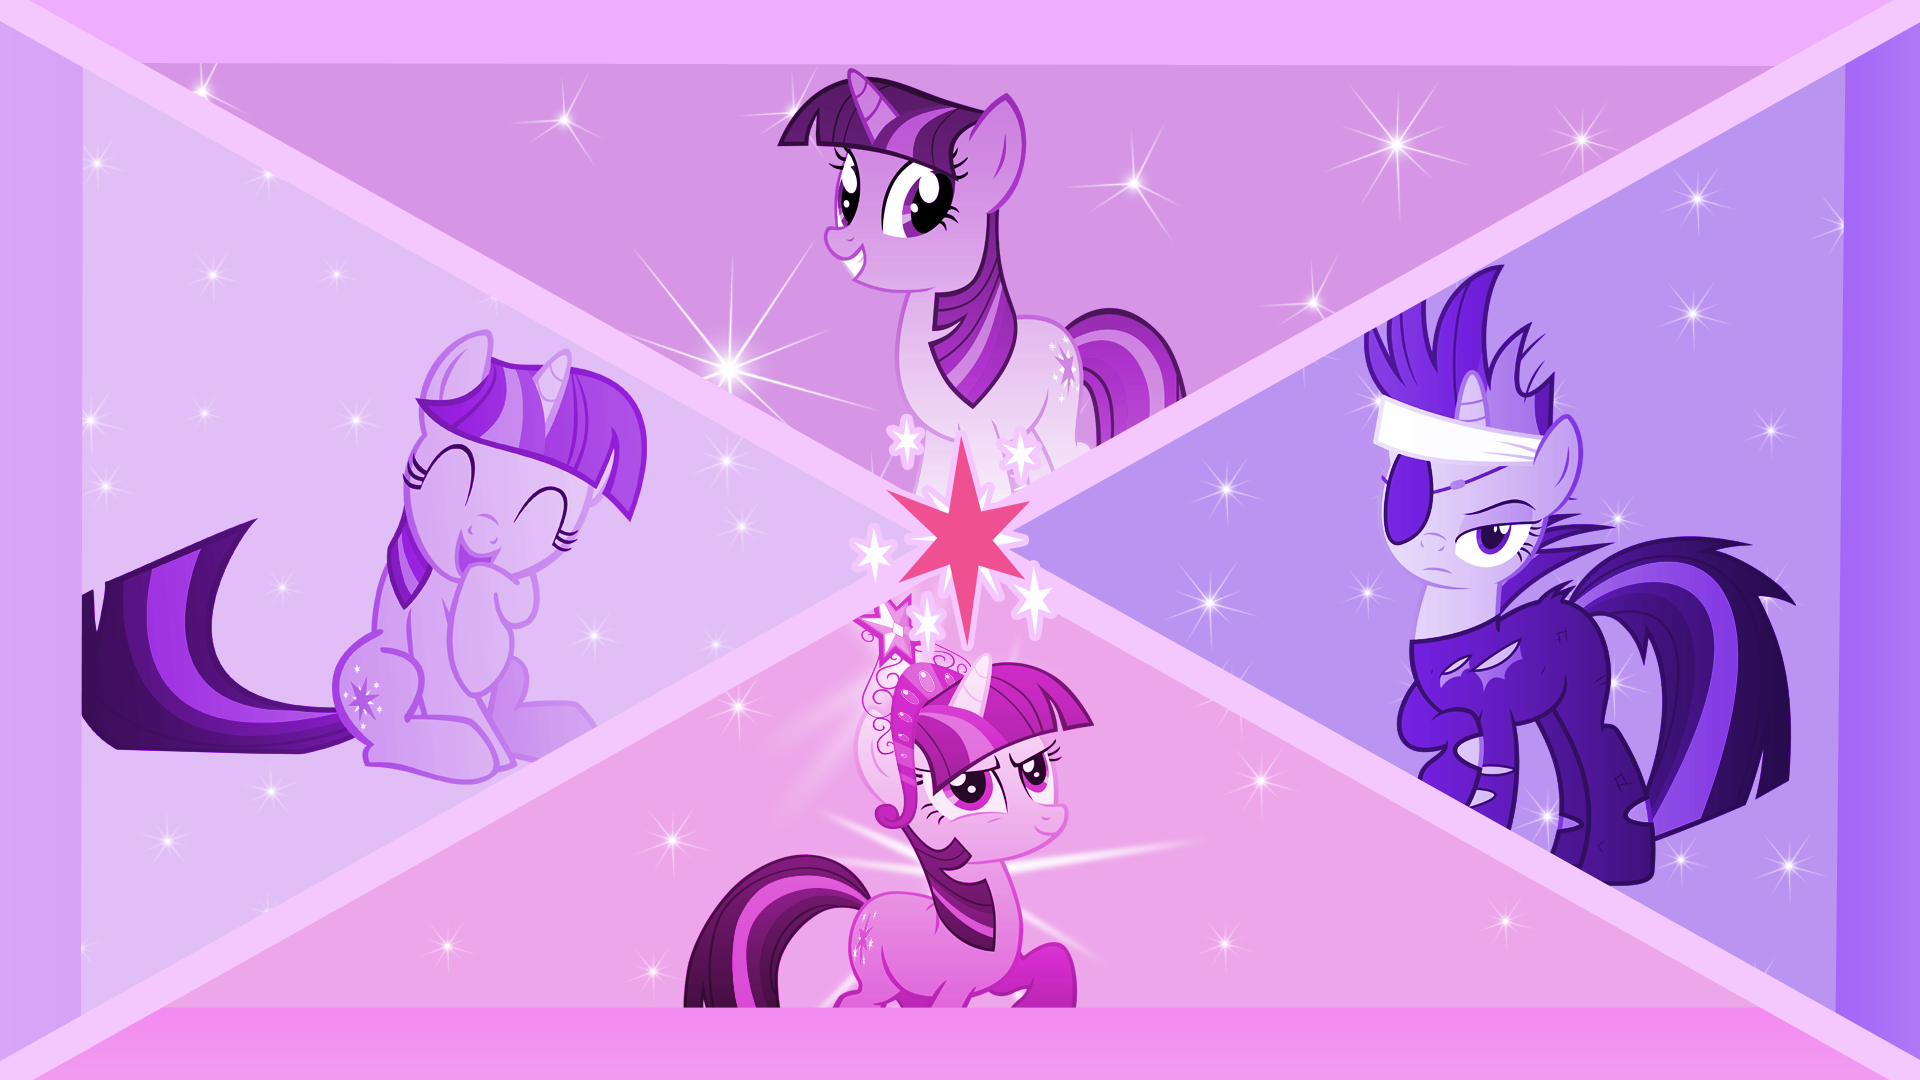 Twilight Sparkle Split Screen Wallpaper by BlackGryph0n, HankOfficer, Liggliluff, marco23p, Scootaloooo and ZuTheSkunk